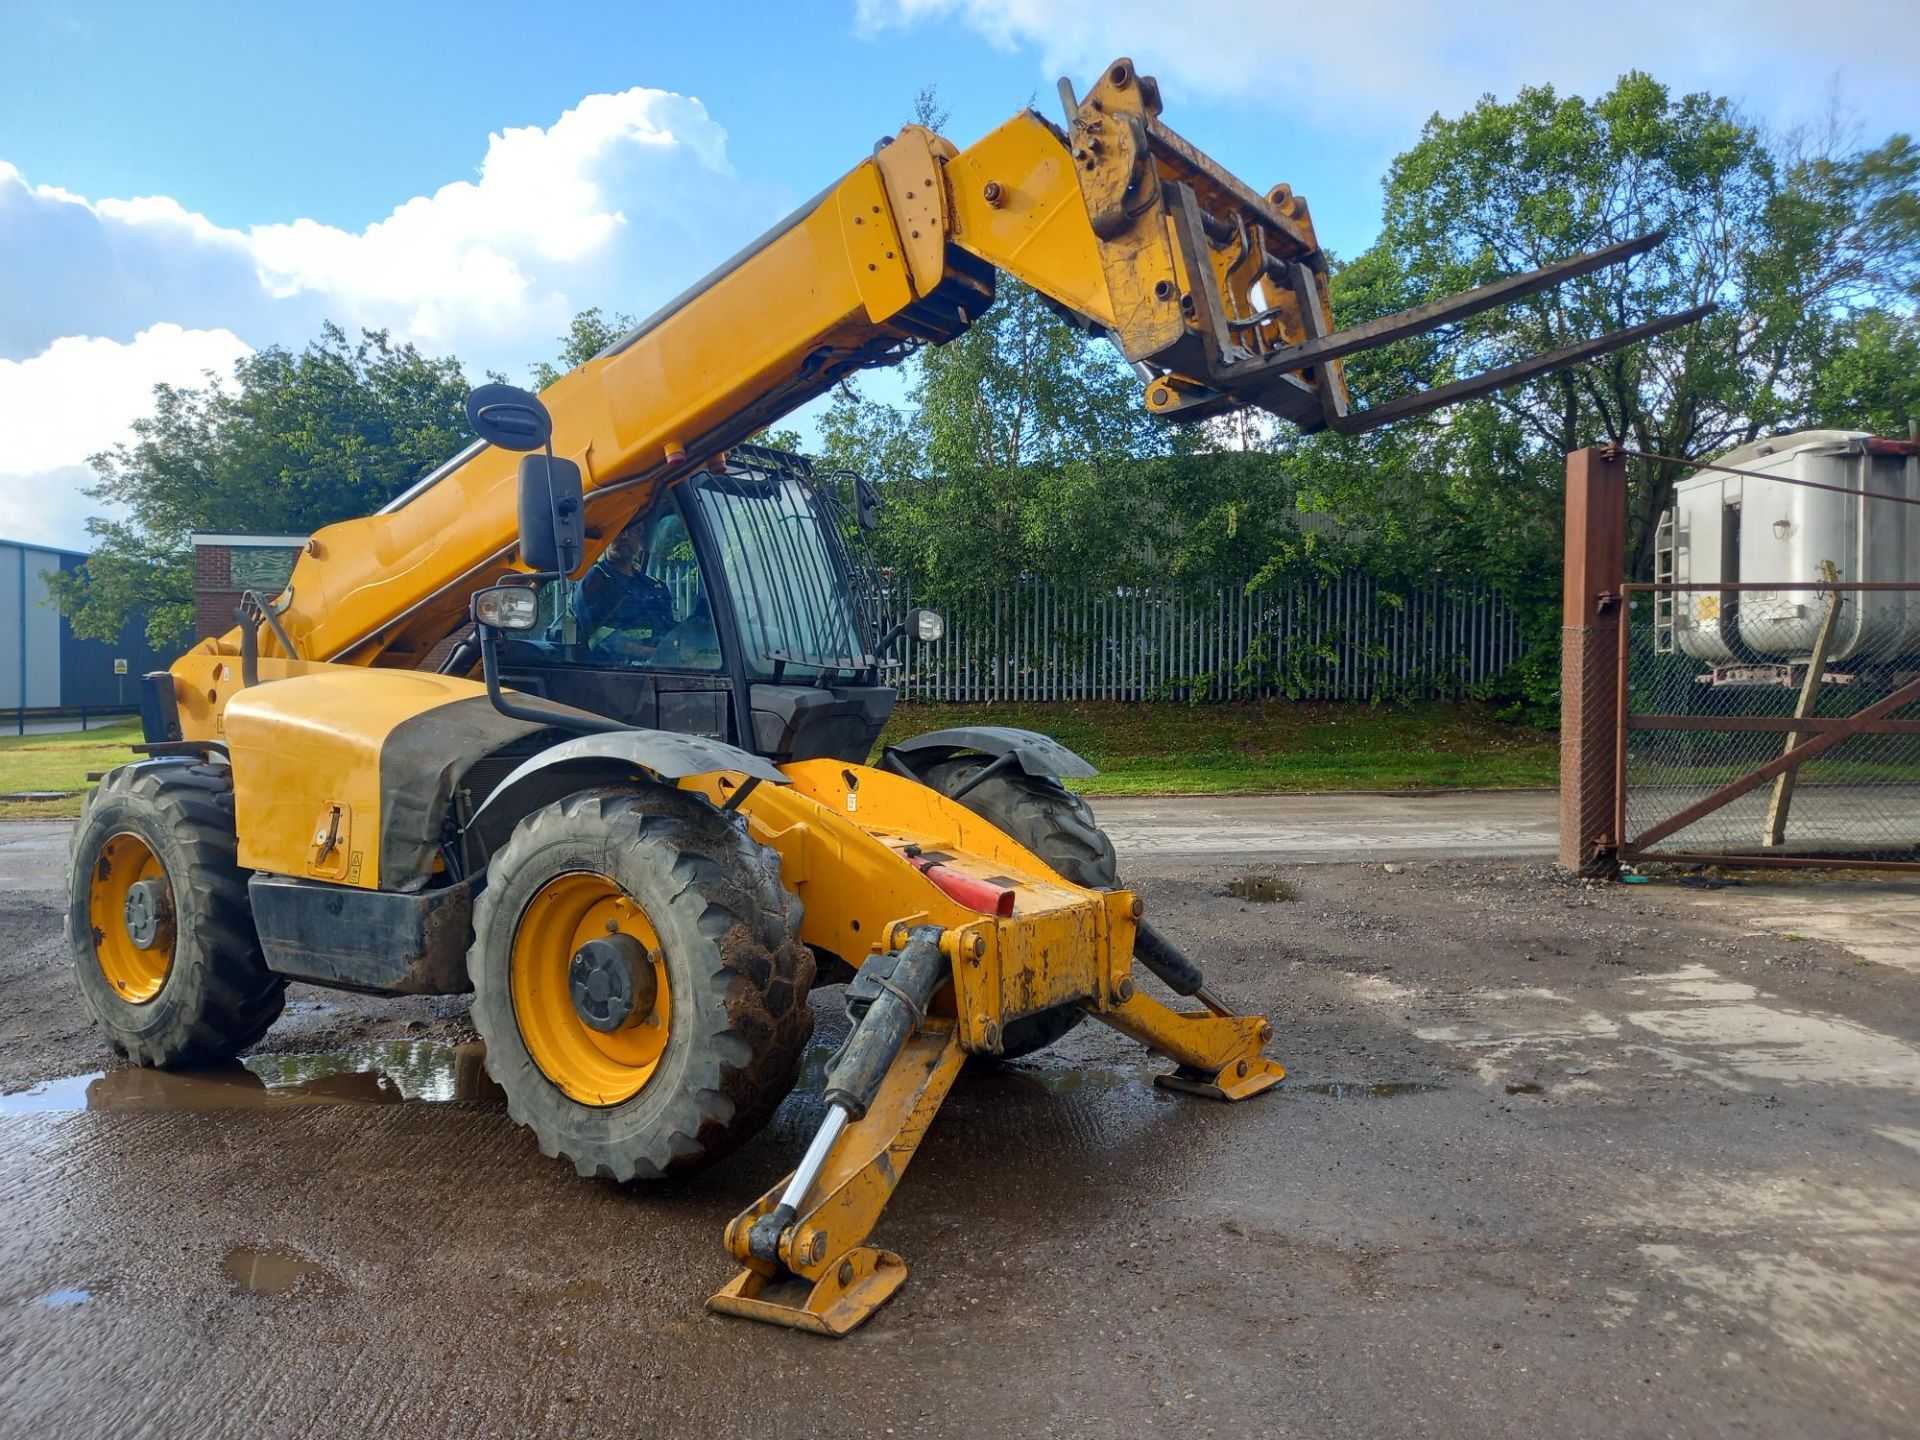 2012 JCB 535-125 Hi Viz 4x4 telehandler c/w forks and fitted with 3rd hydraulic line. Approx. 6680 r - Image 9 of 9